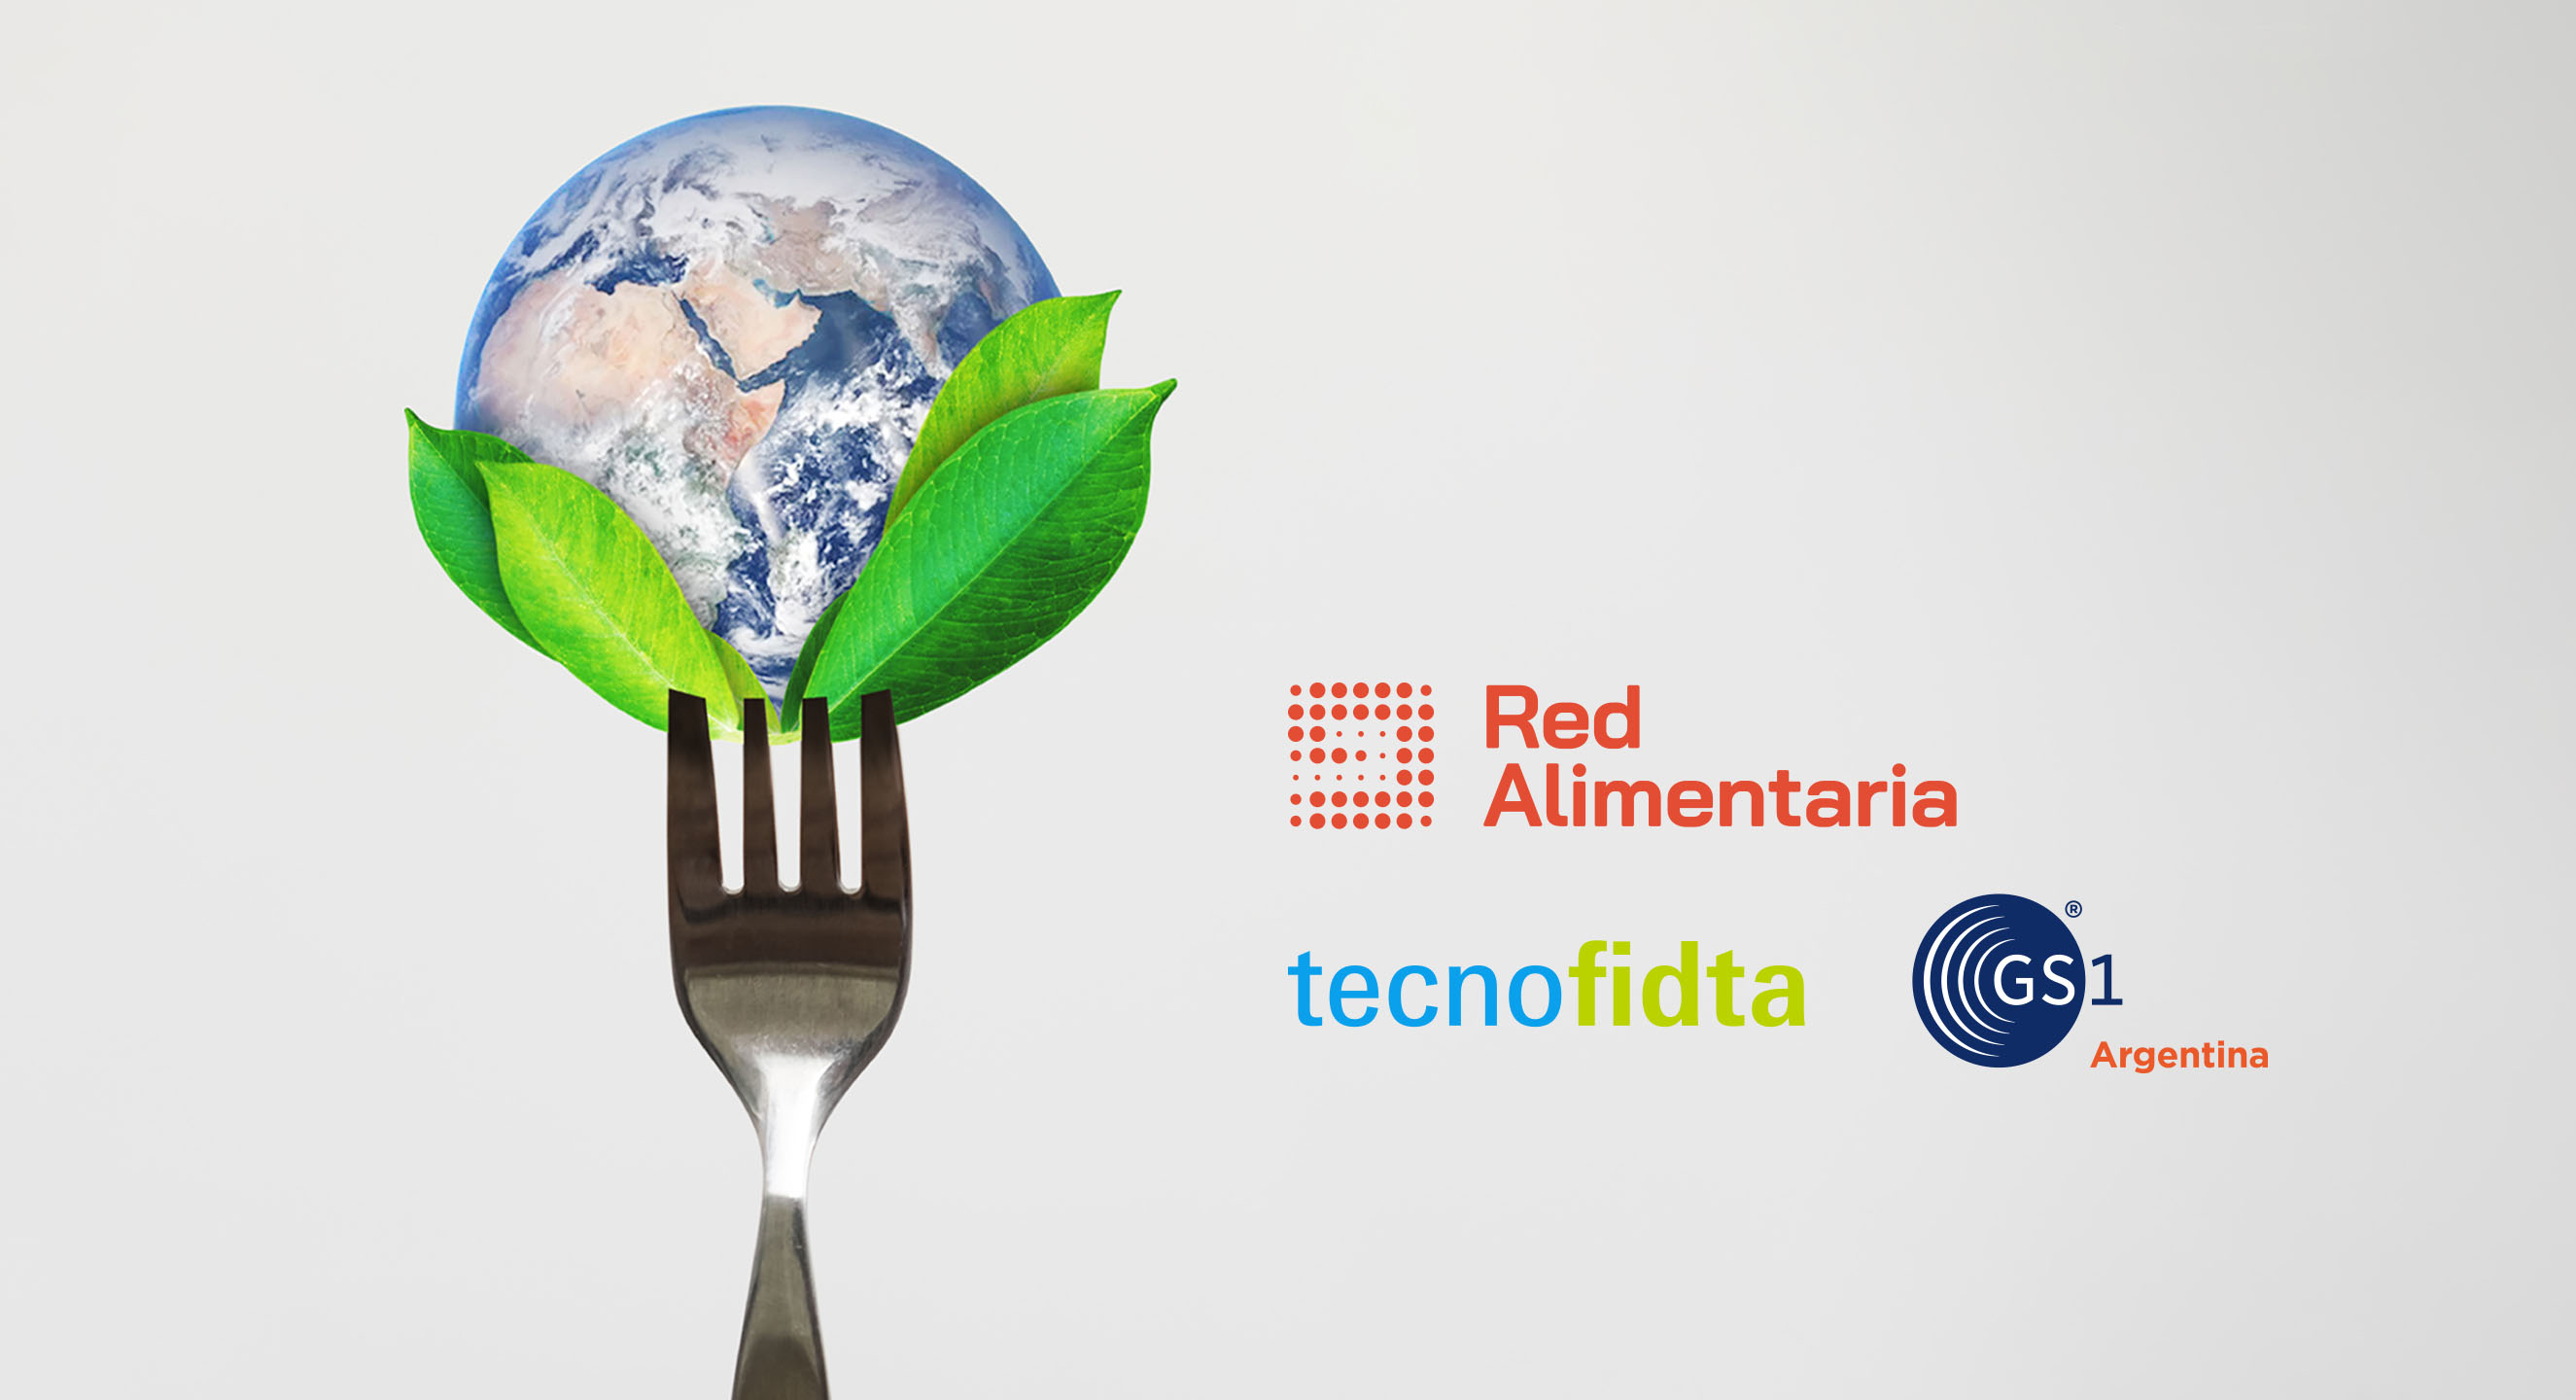 Green food, environmental concept. Hand holding fork with leaves and globe. Element of this image are furnished by NASA